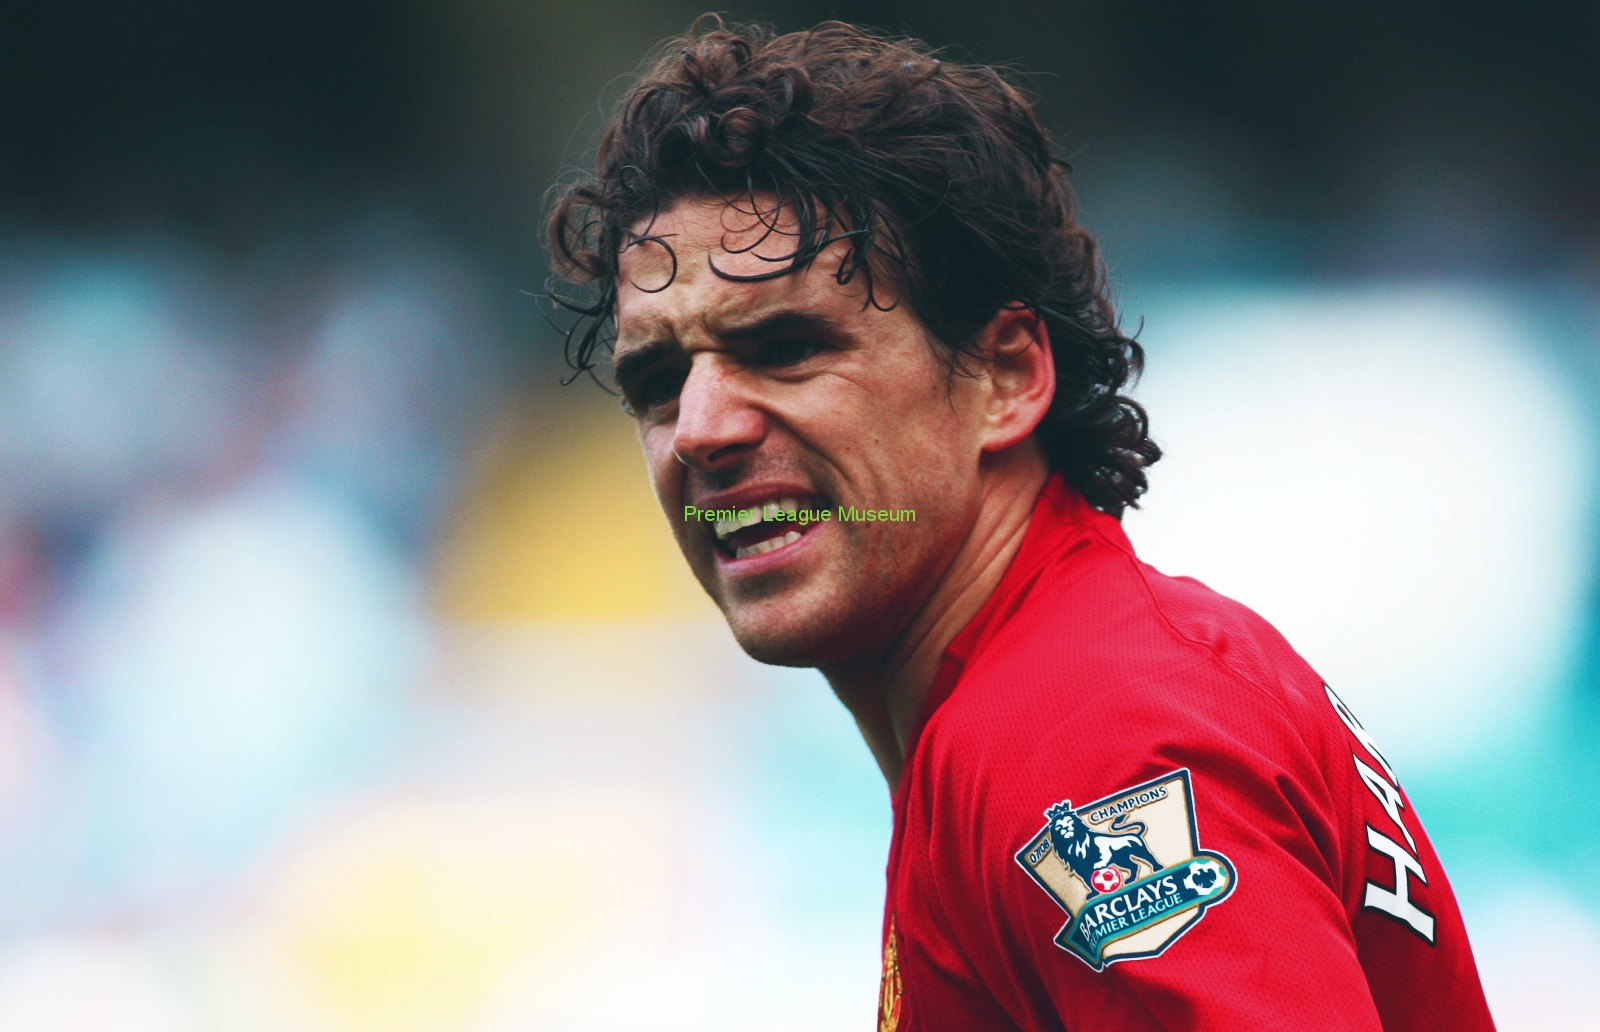 Owen hargreaves Manchester United